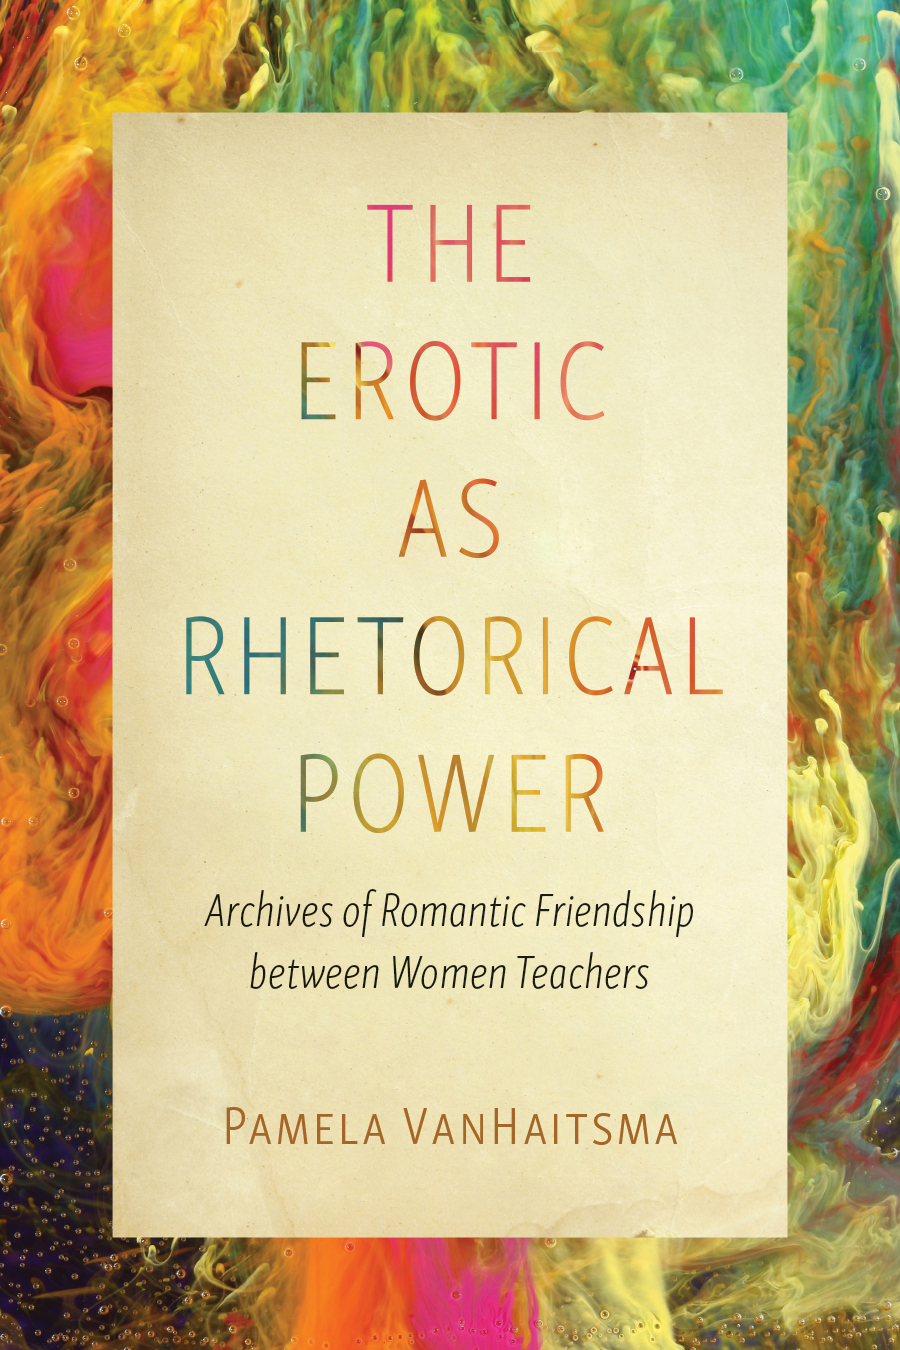 Front cover of The Erotic as Rhetorical Power: Archives of Romantic Friendship between Women Teachers, by Pamela VanHaitsma, with the text on a parchment-colored background over a colorful abstract image.